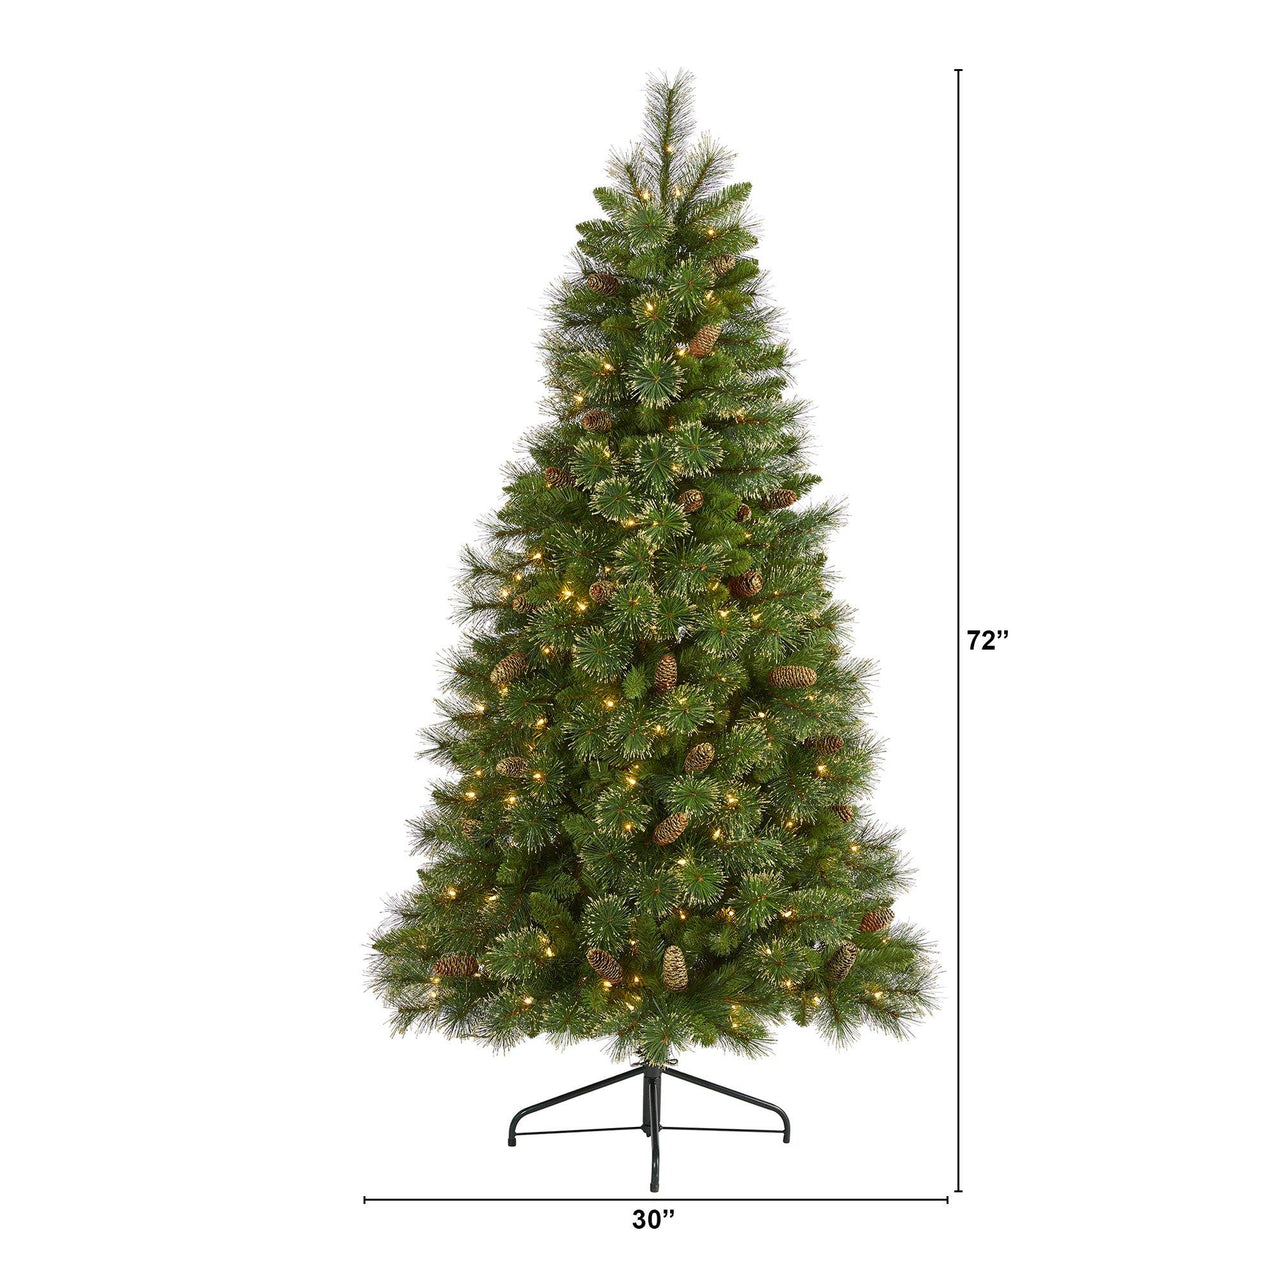 6’ Golden Tip Washington Pine Artificial Christmas Tree with 250 Clear Lights, Pine Cones and 750 Bendable Branches - The Fox Decor